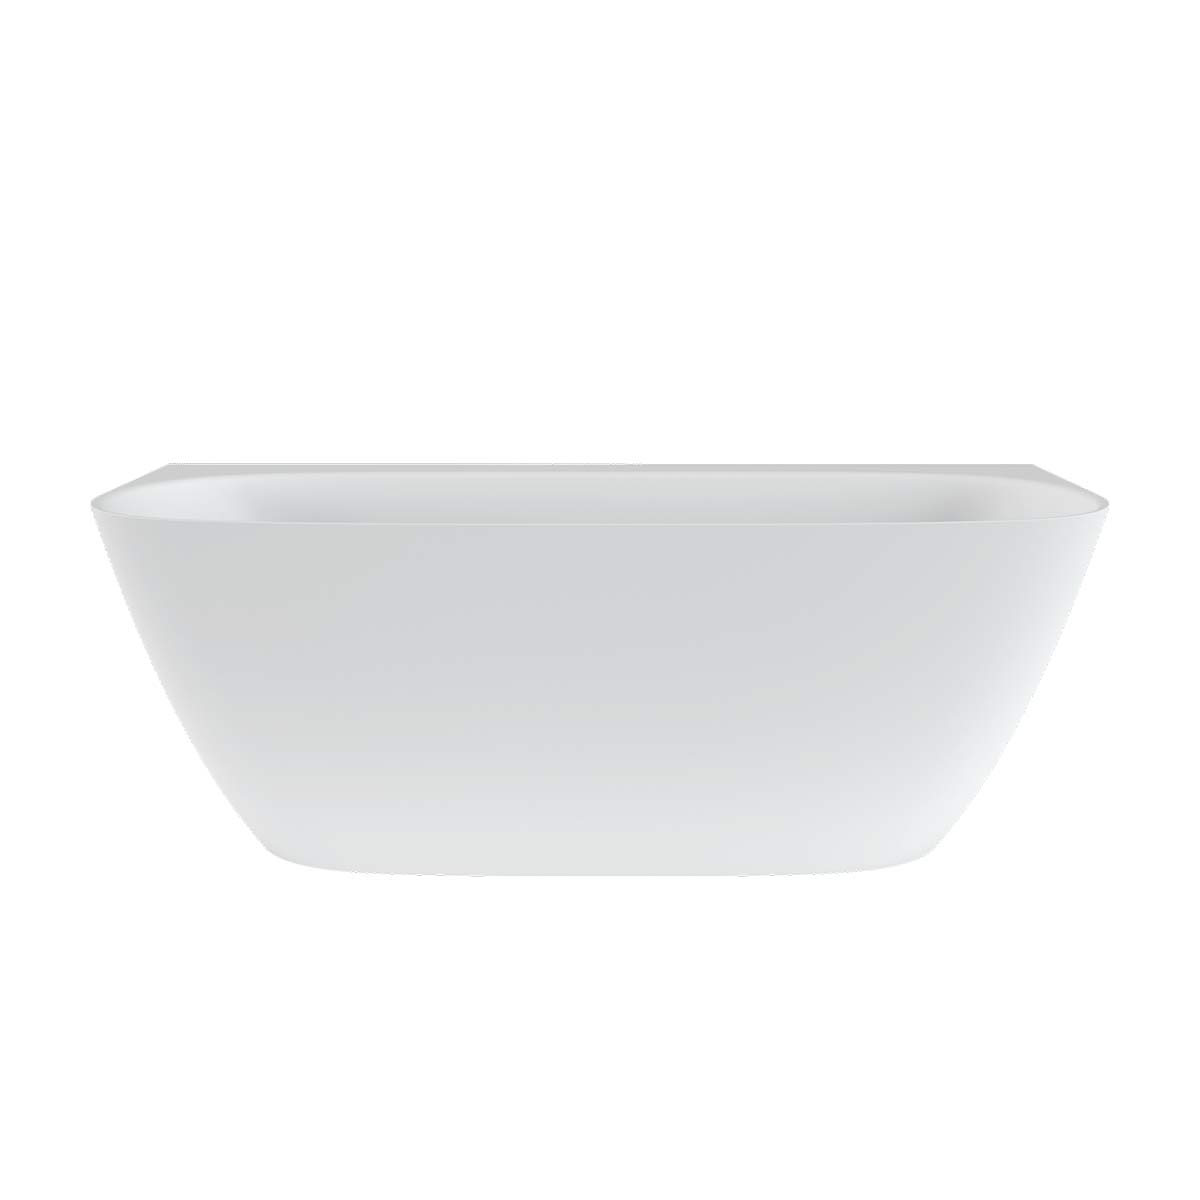 Victoria + Albert Lussari 1700 back to wall bath in matt white. Also available in gloss white or custom colour exterior. Distributed in Australia by Luxe by Design, Brisbane.